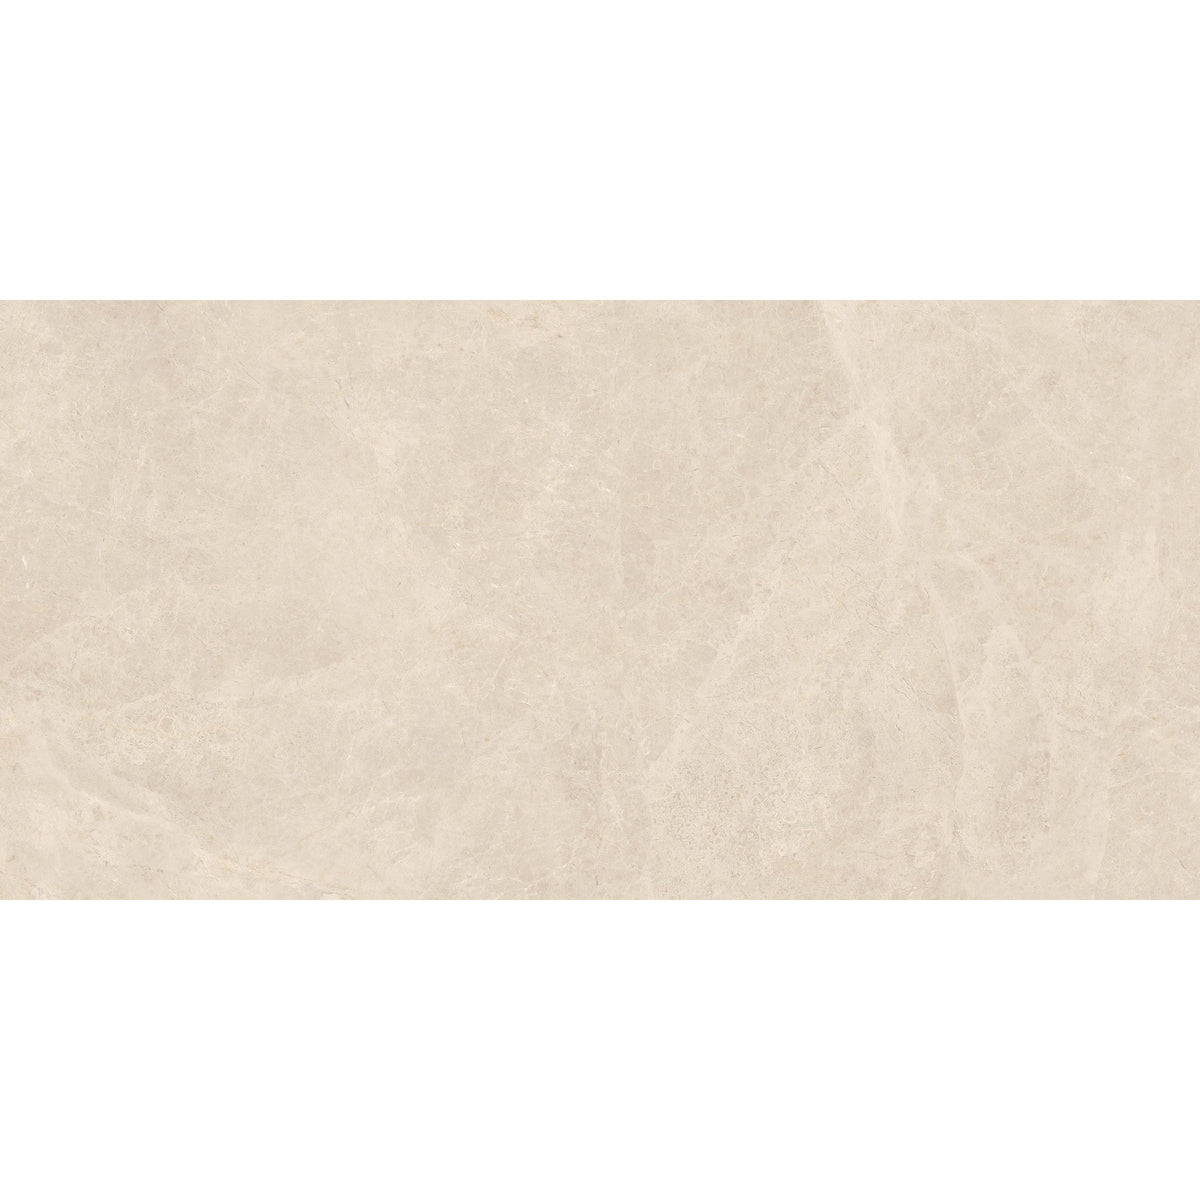 Anatolia Mayfair 16 in. x 32 in. HD Rectified Porcelain Tile - Allure Ivory (Polished)